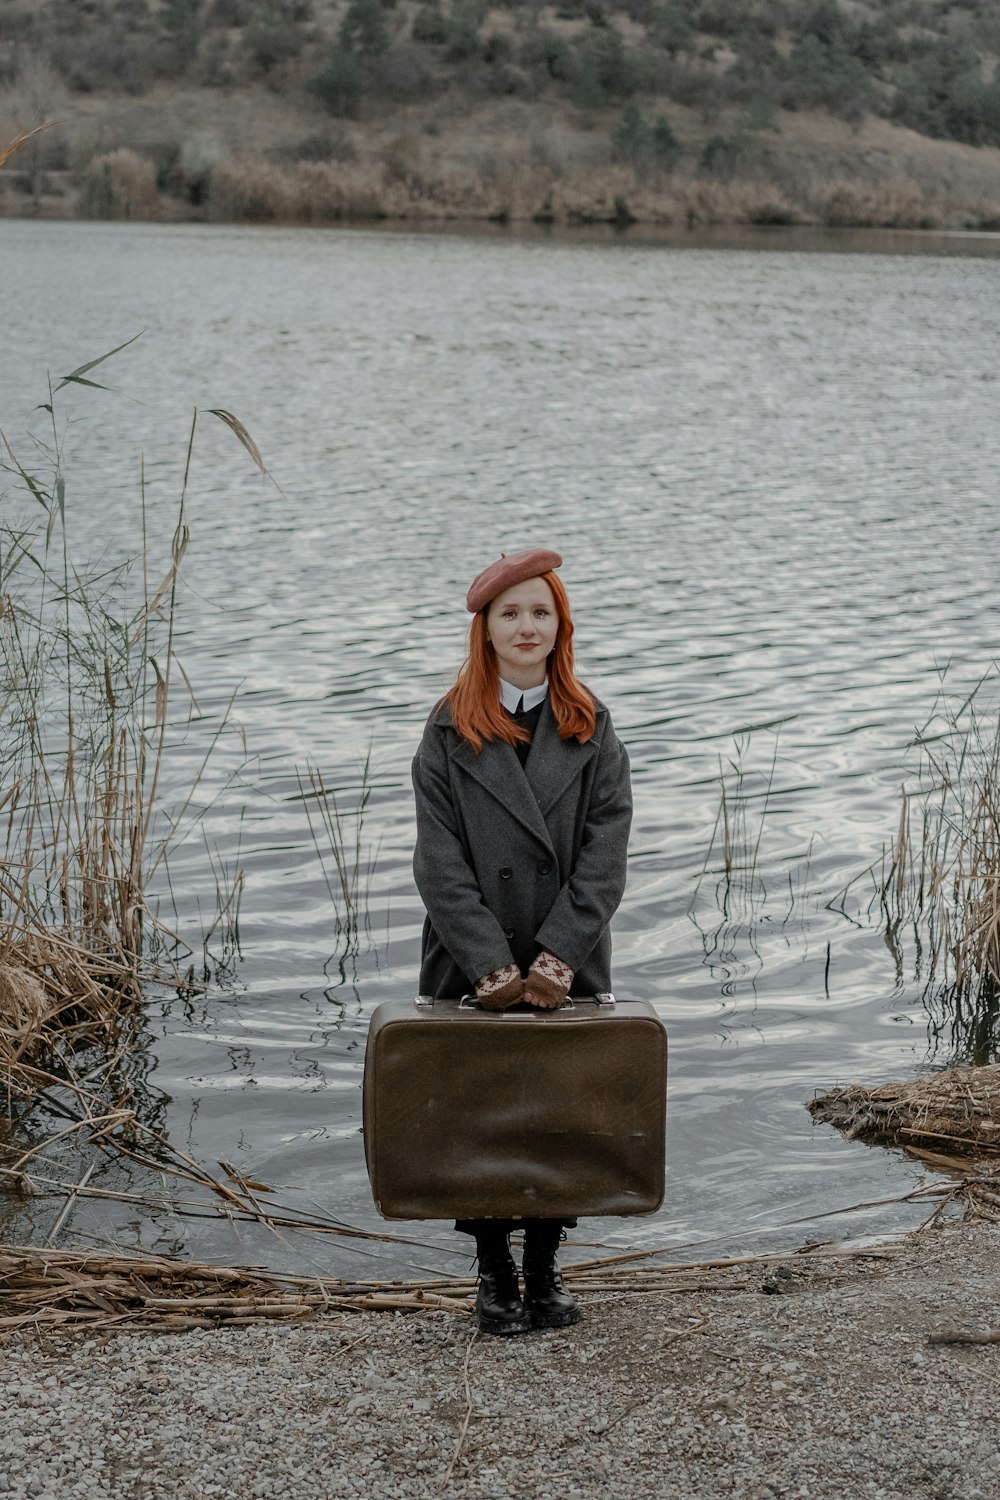 a woman with red hair is holding a suitcase by the water